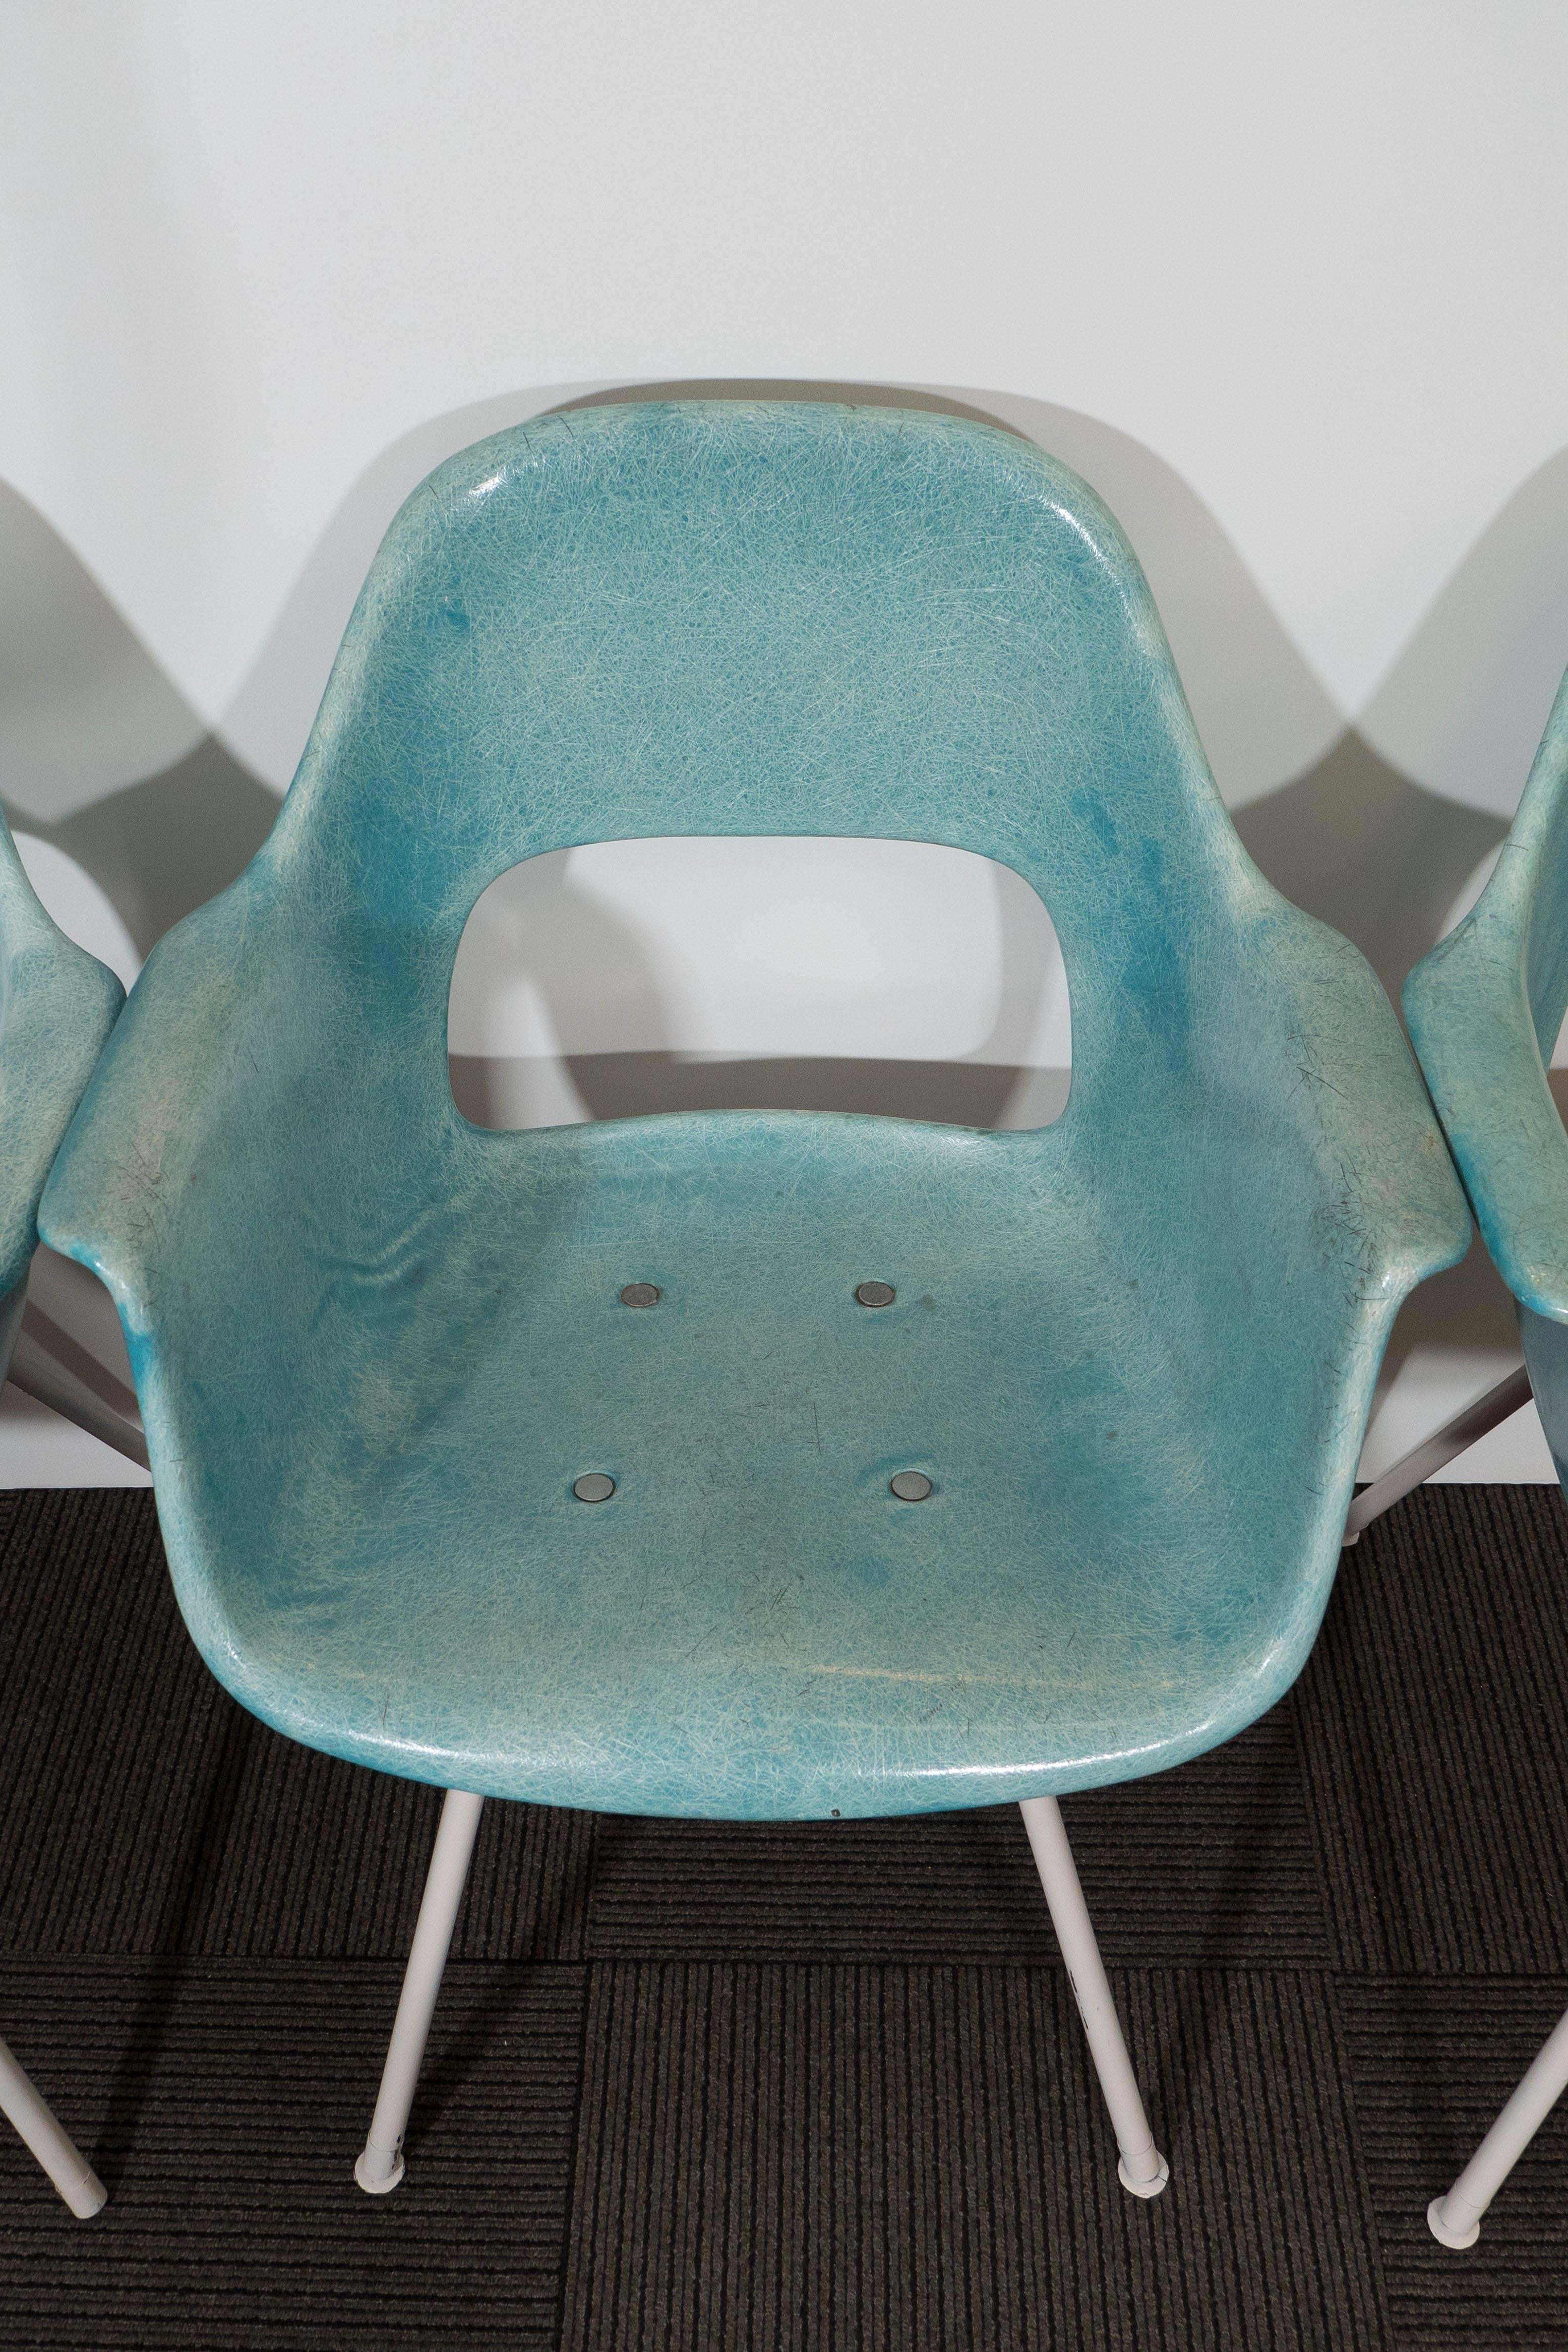 A beautiful set of five turquoise armchairs, in the style of the iconic Zenith design by Charles and Ray Eames, originally created in the 1950s. Each chair features a molded fiberglass seat, with metal accents, and the legs finished in white paint.